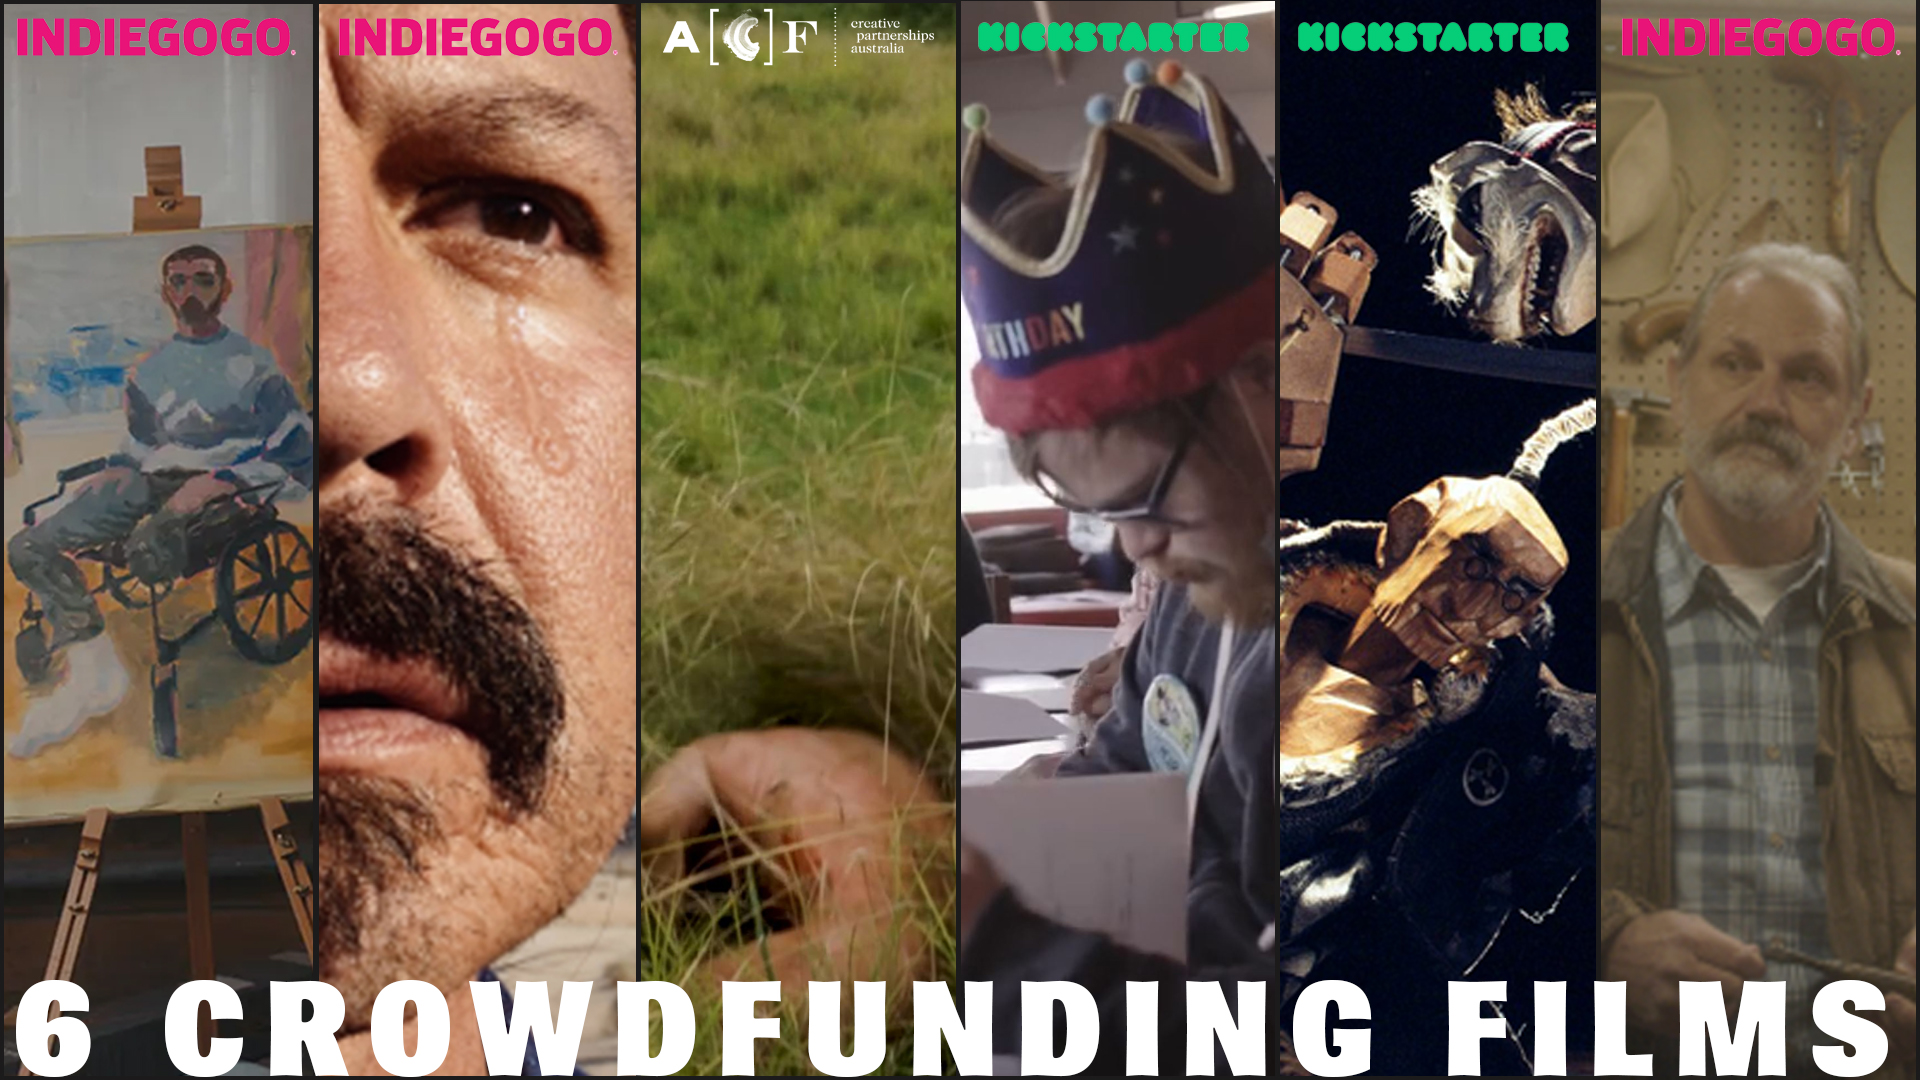 6 Crowdfunding Films to Support by Cinemast.net